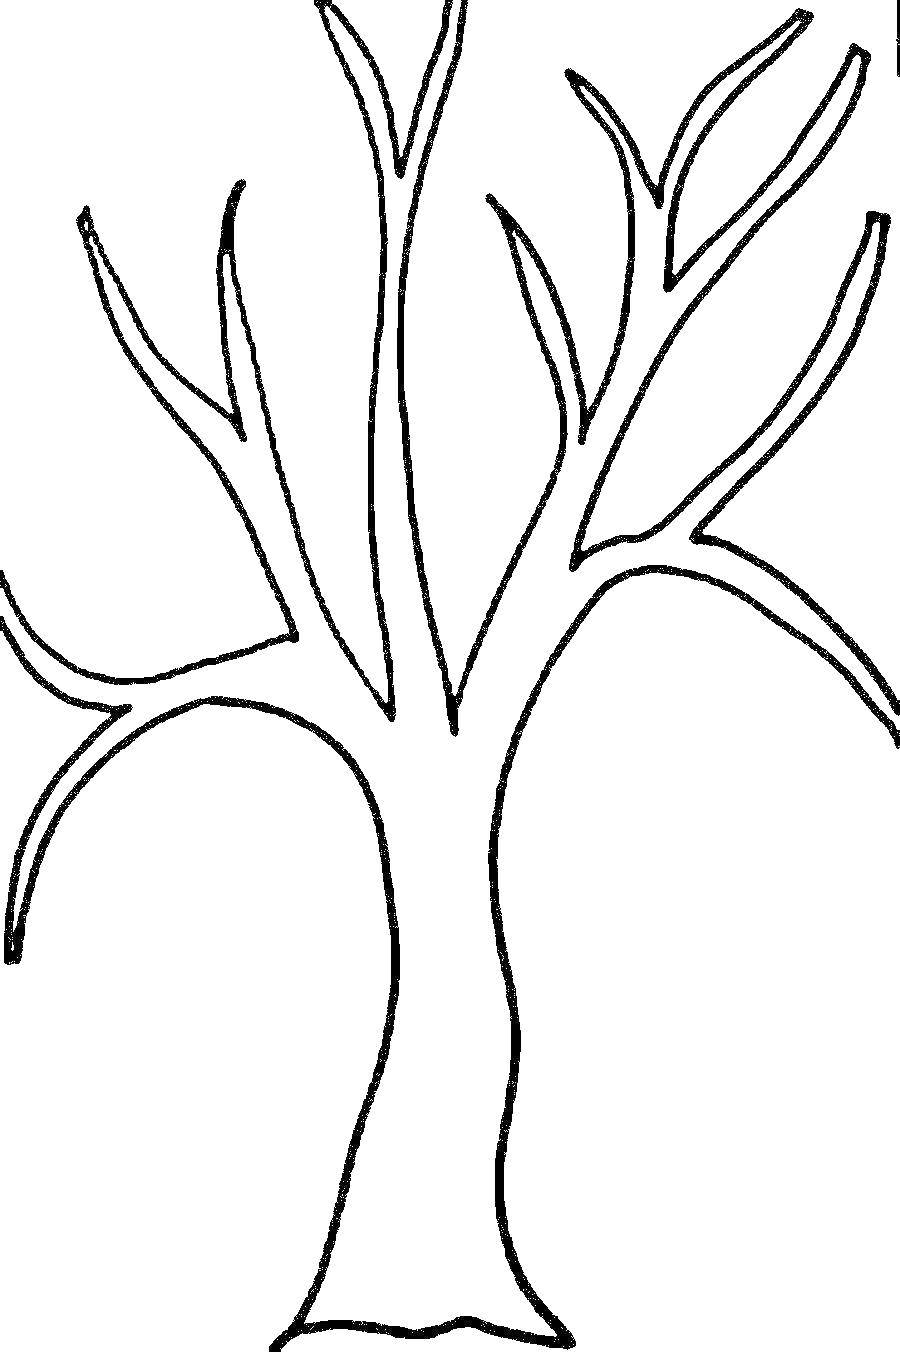 Coloring Tree without leaves. Category tree. Tags:  tree.